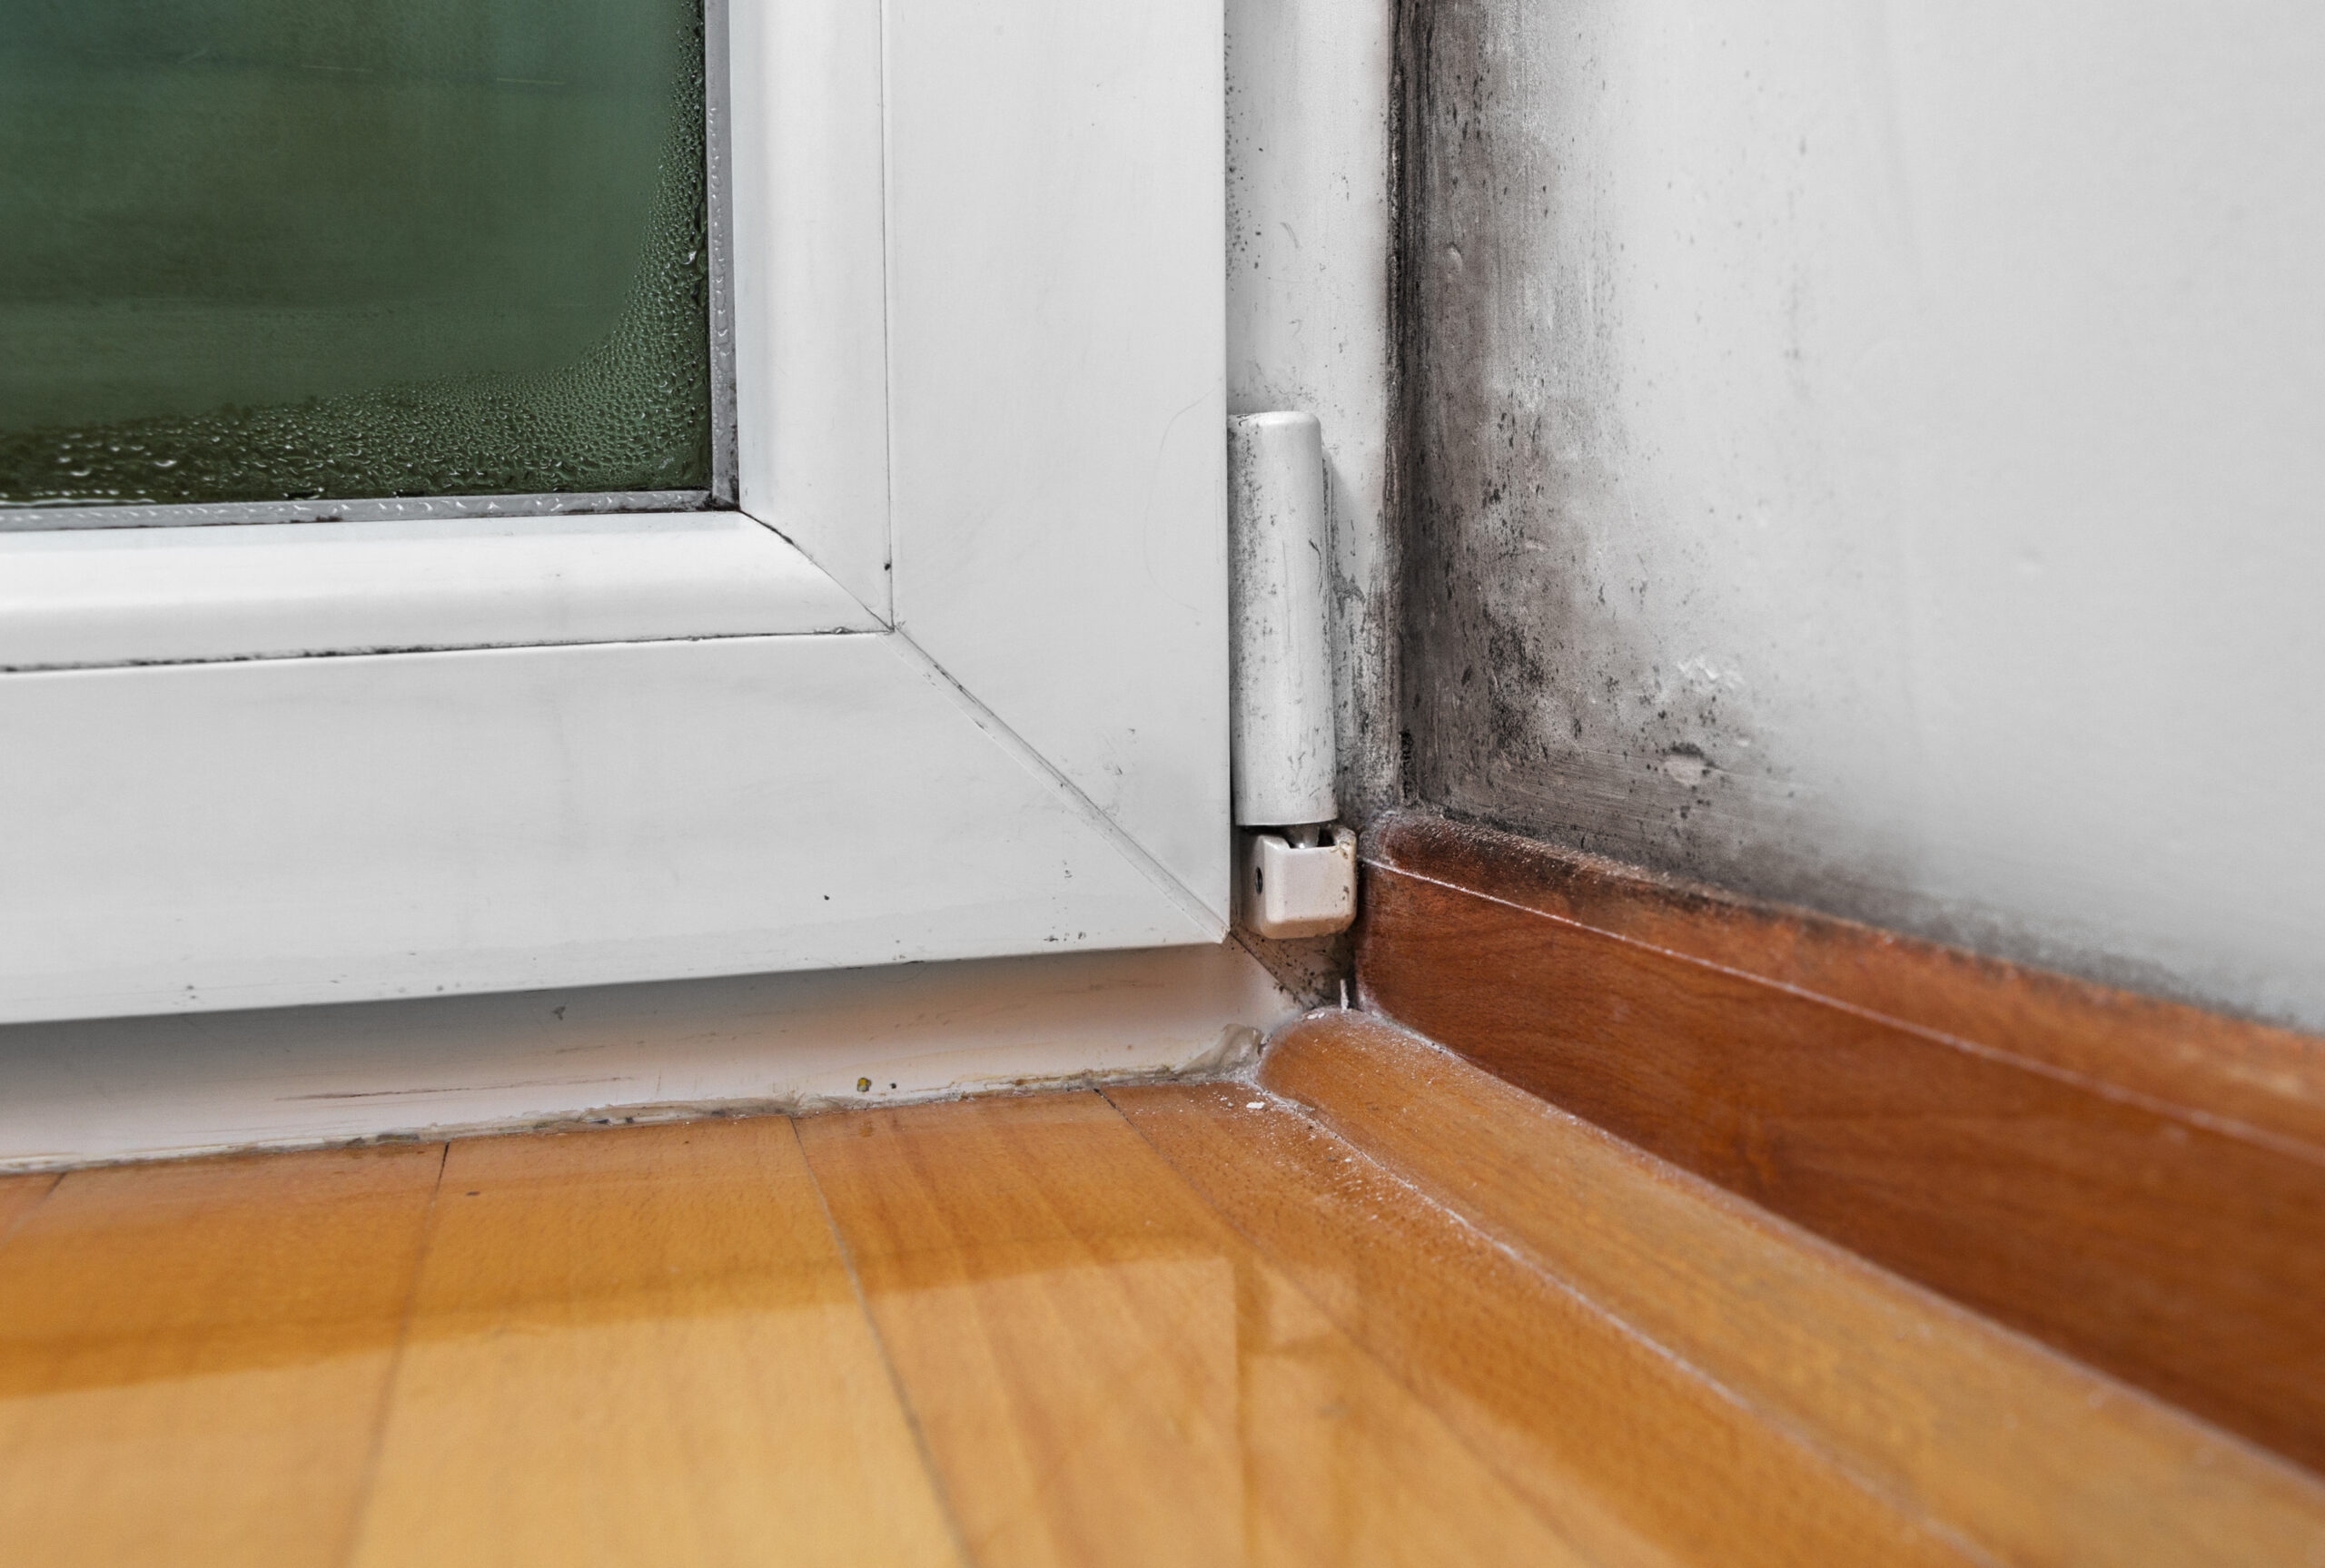 Can Mold Growth Still Happen in Winter?